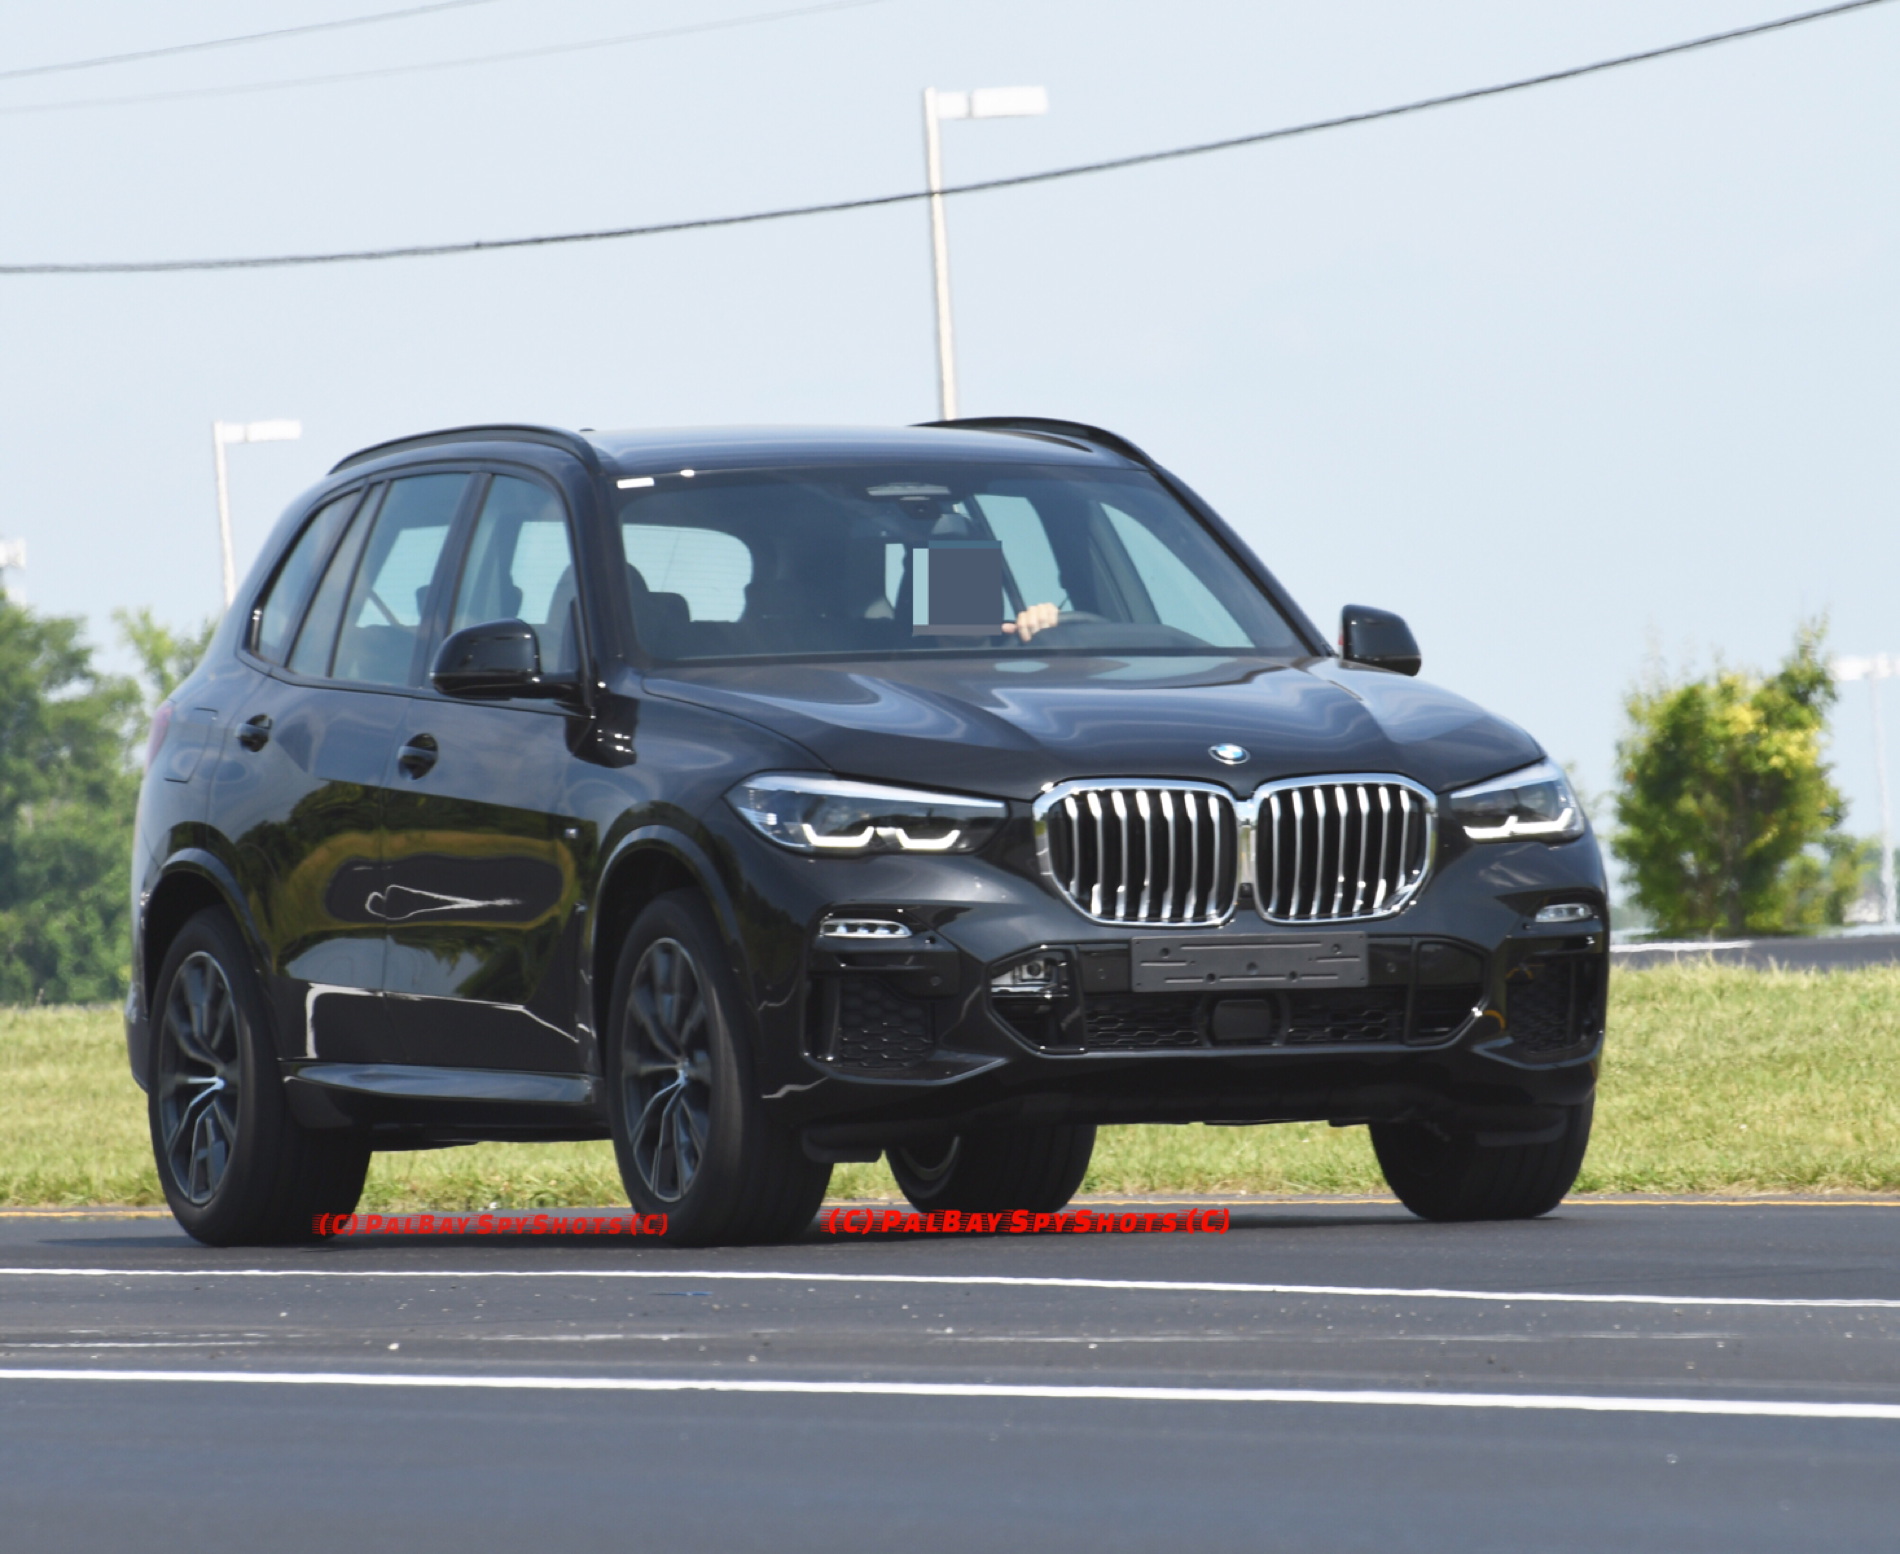 The upcoming BMW G05 X5 xDrive45e hybrid spotted on the road